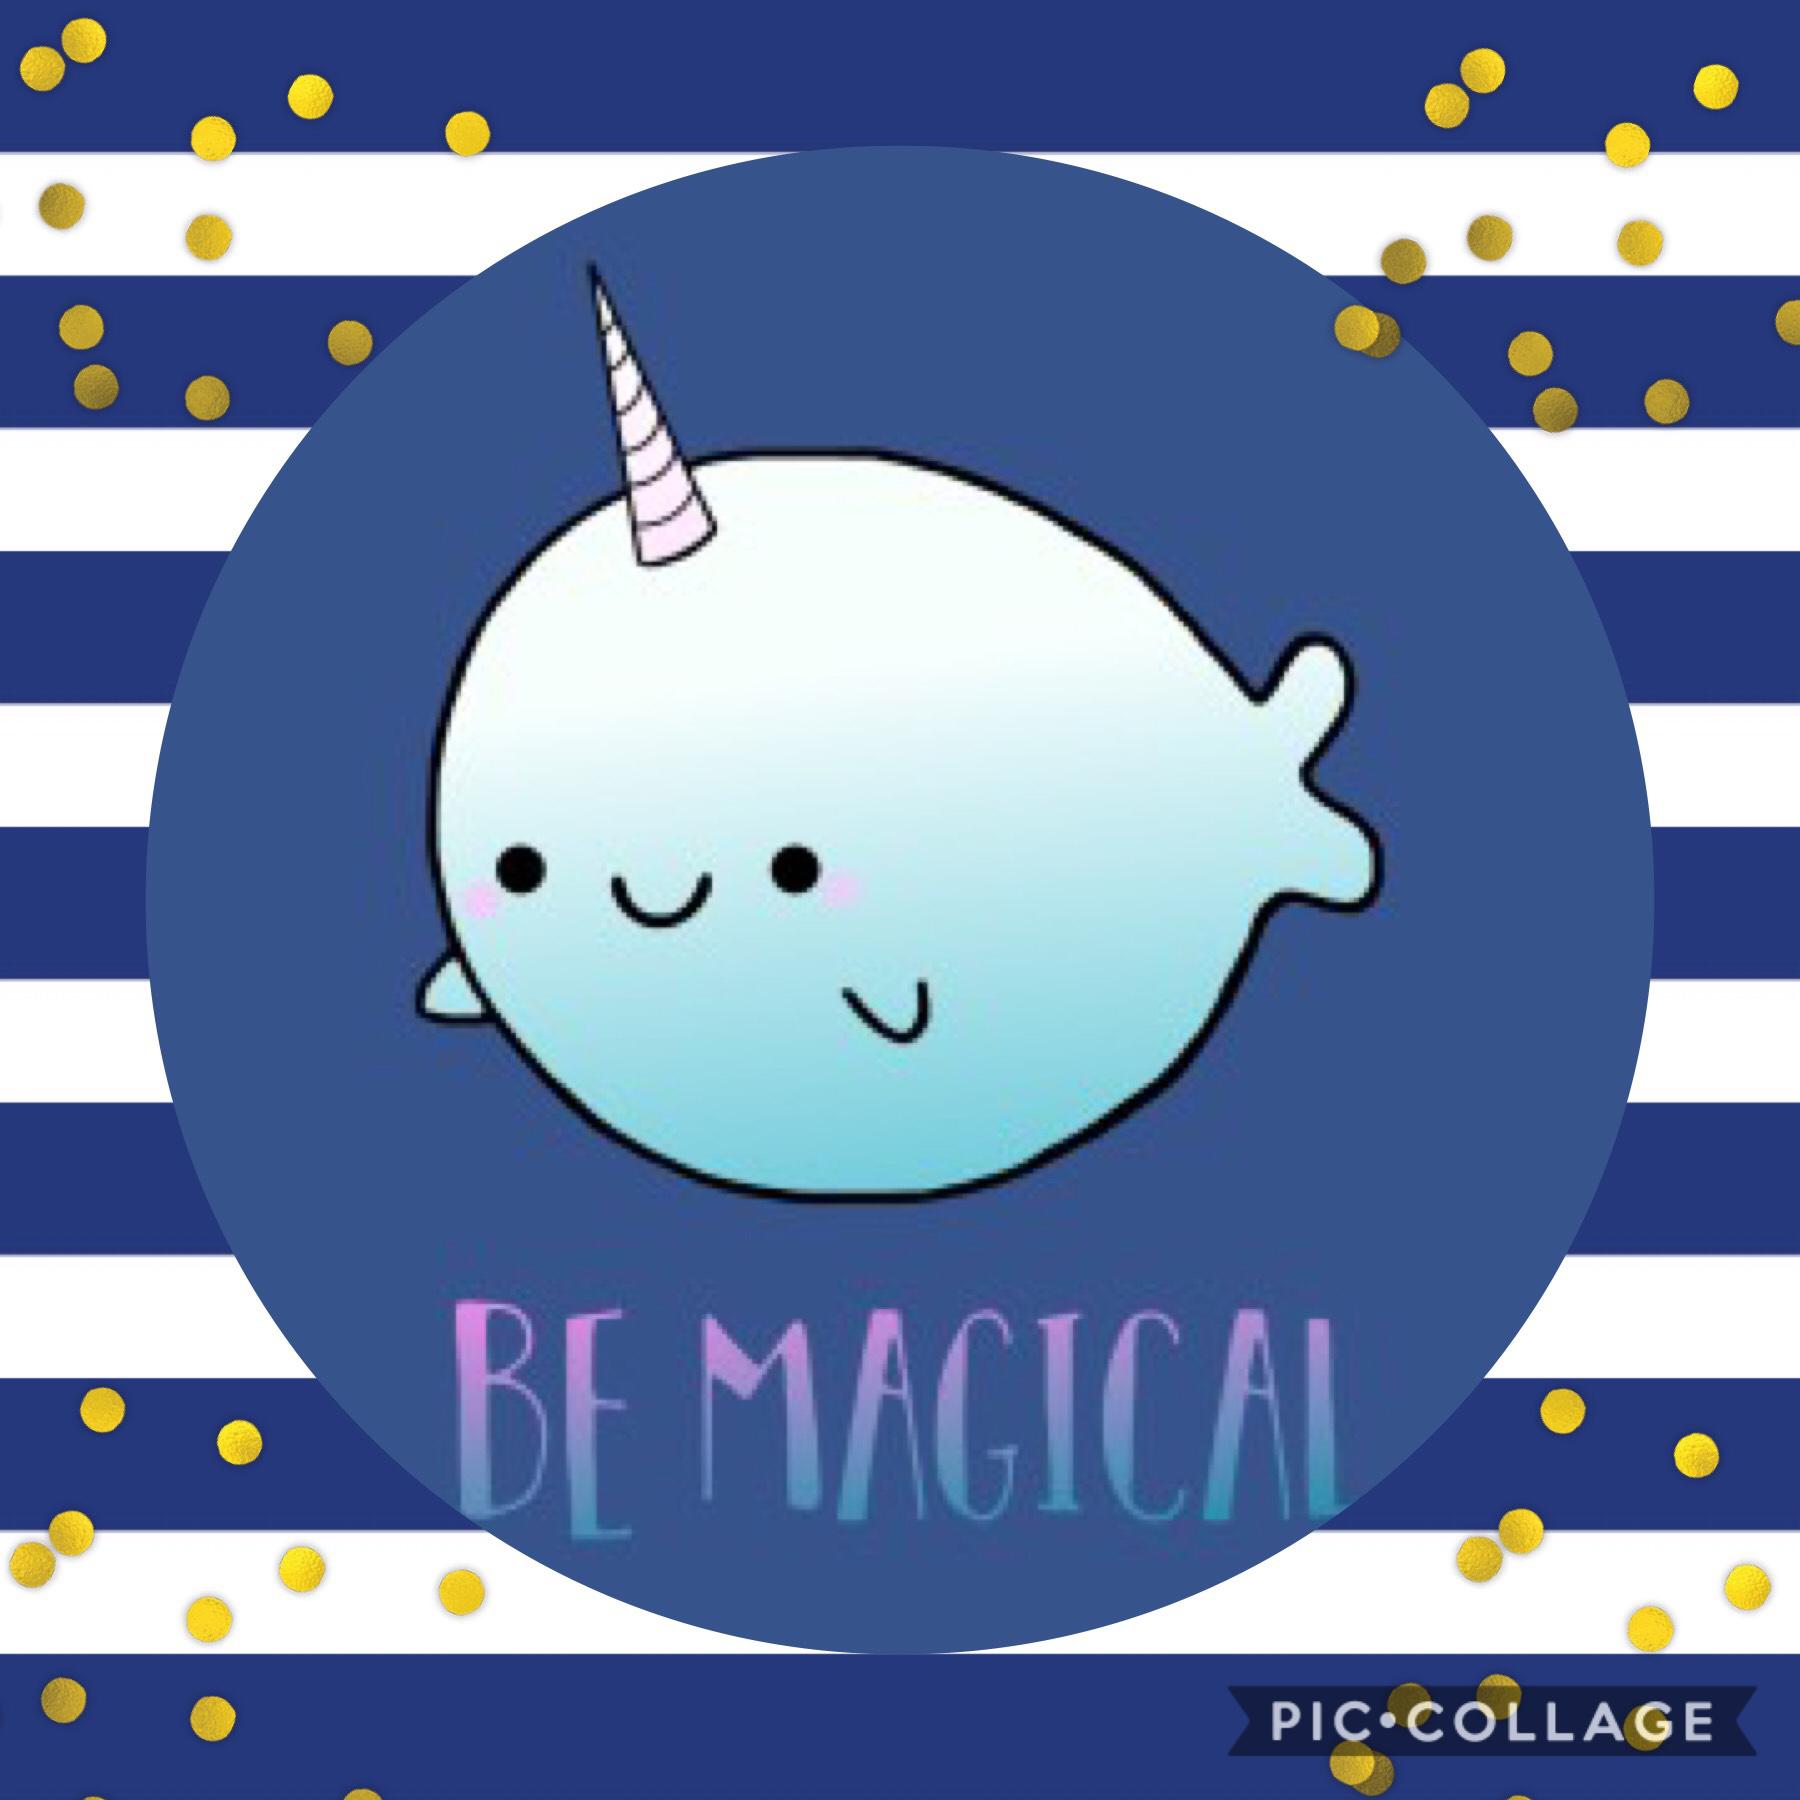 WELCOME TO MY ACCOUNT!!! I LOVE NARWHALS BTW!!